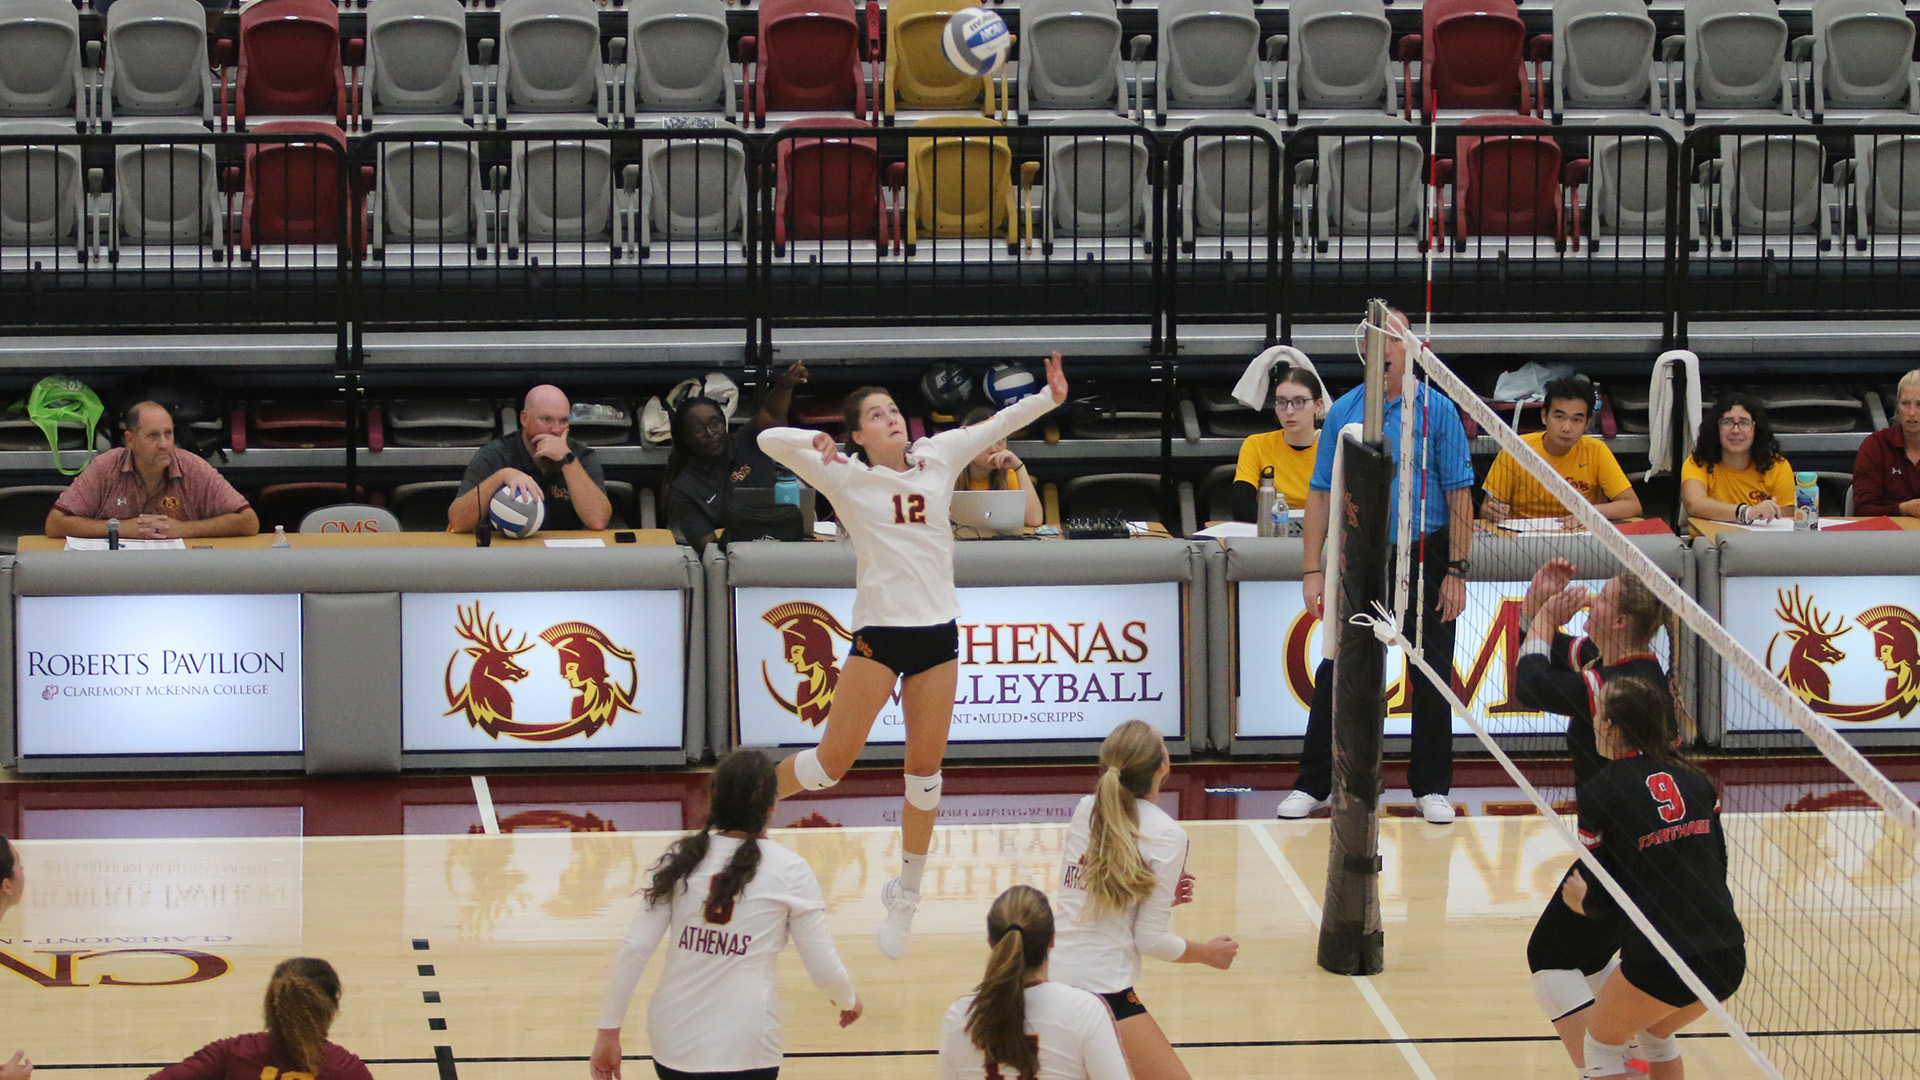 Jenna Holmes had 12 kills to pace the CMS attack